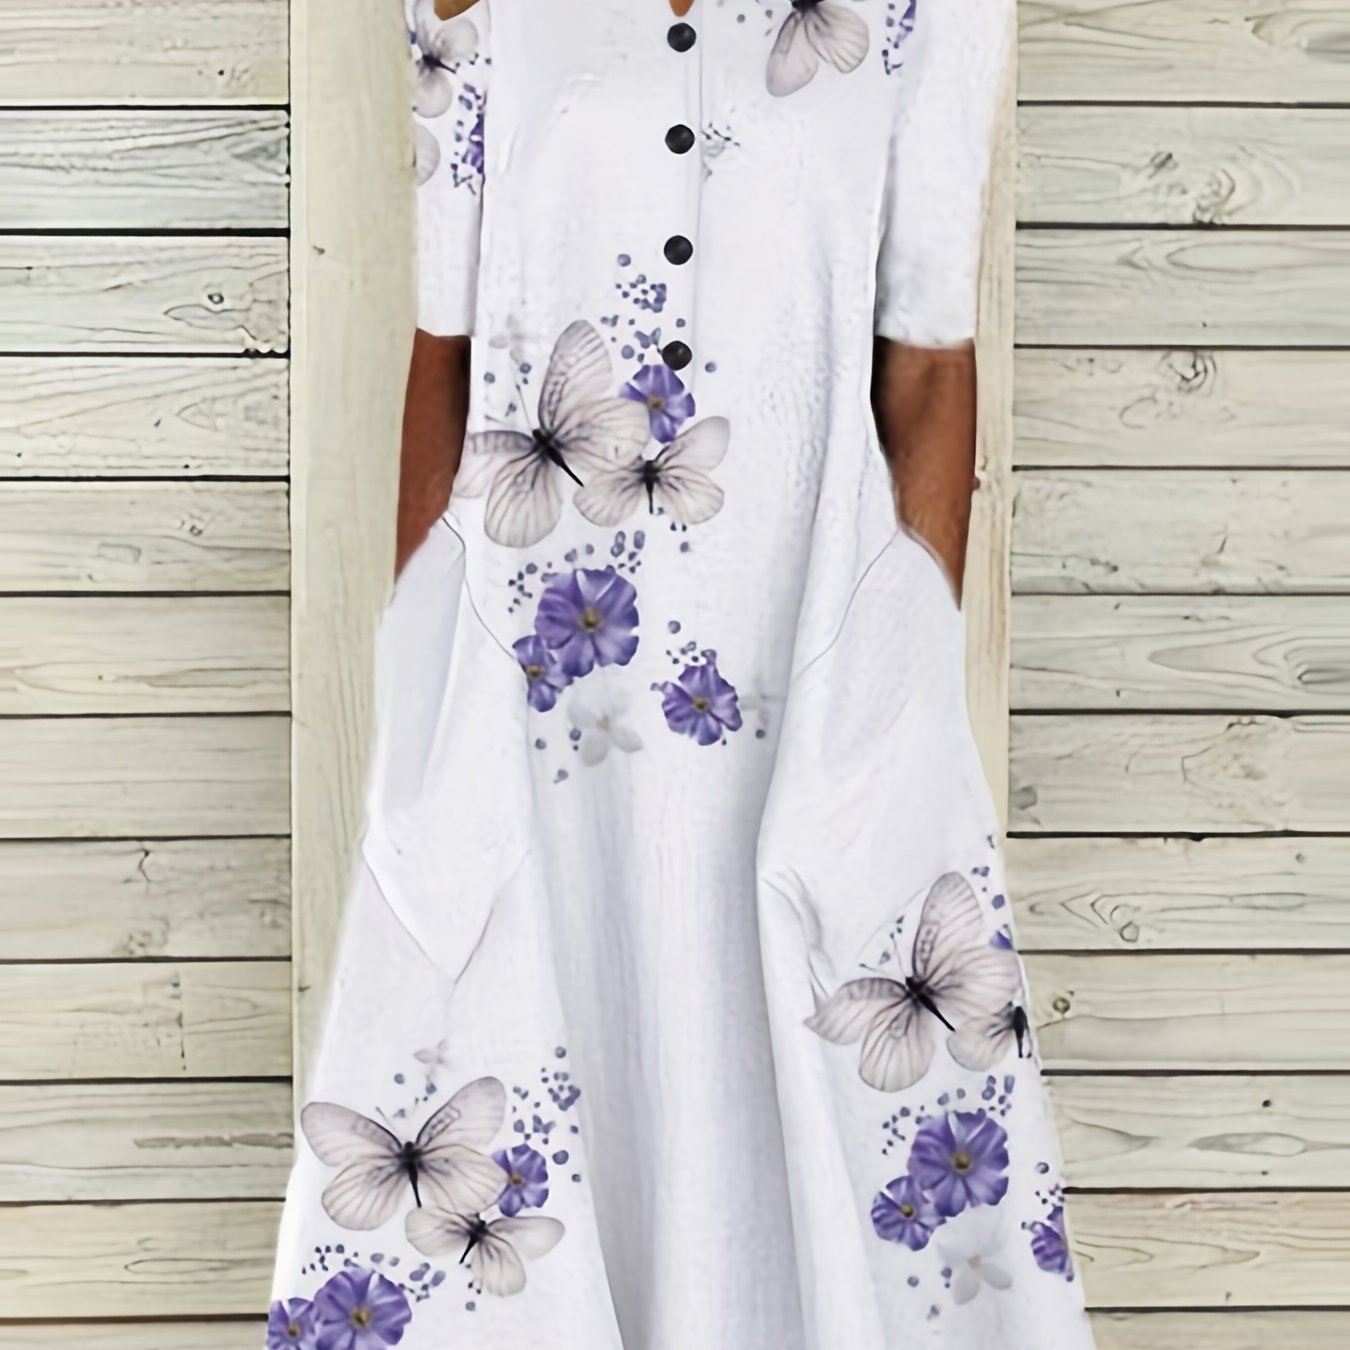 「lovevop」Floral & Butterfly Print V Neck Dress, Casual Button Front Short Sleeve Dress For Spring & Summer, Women's Clothing